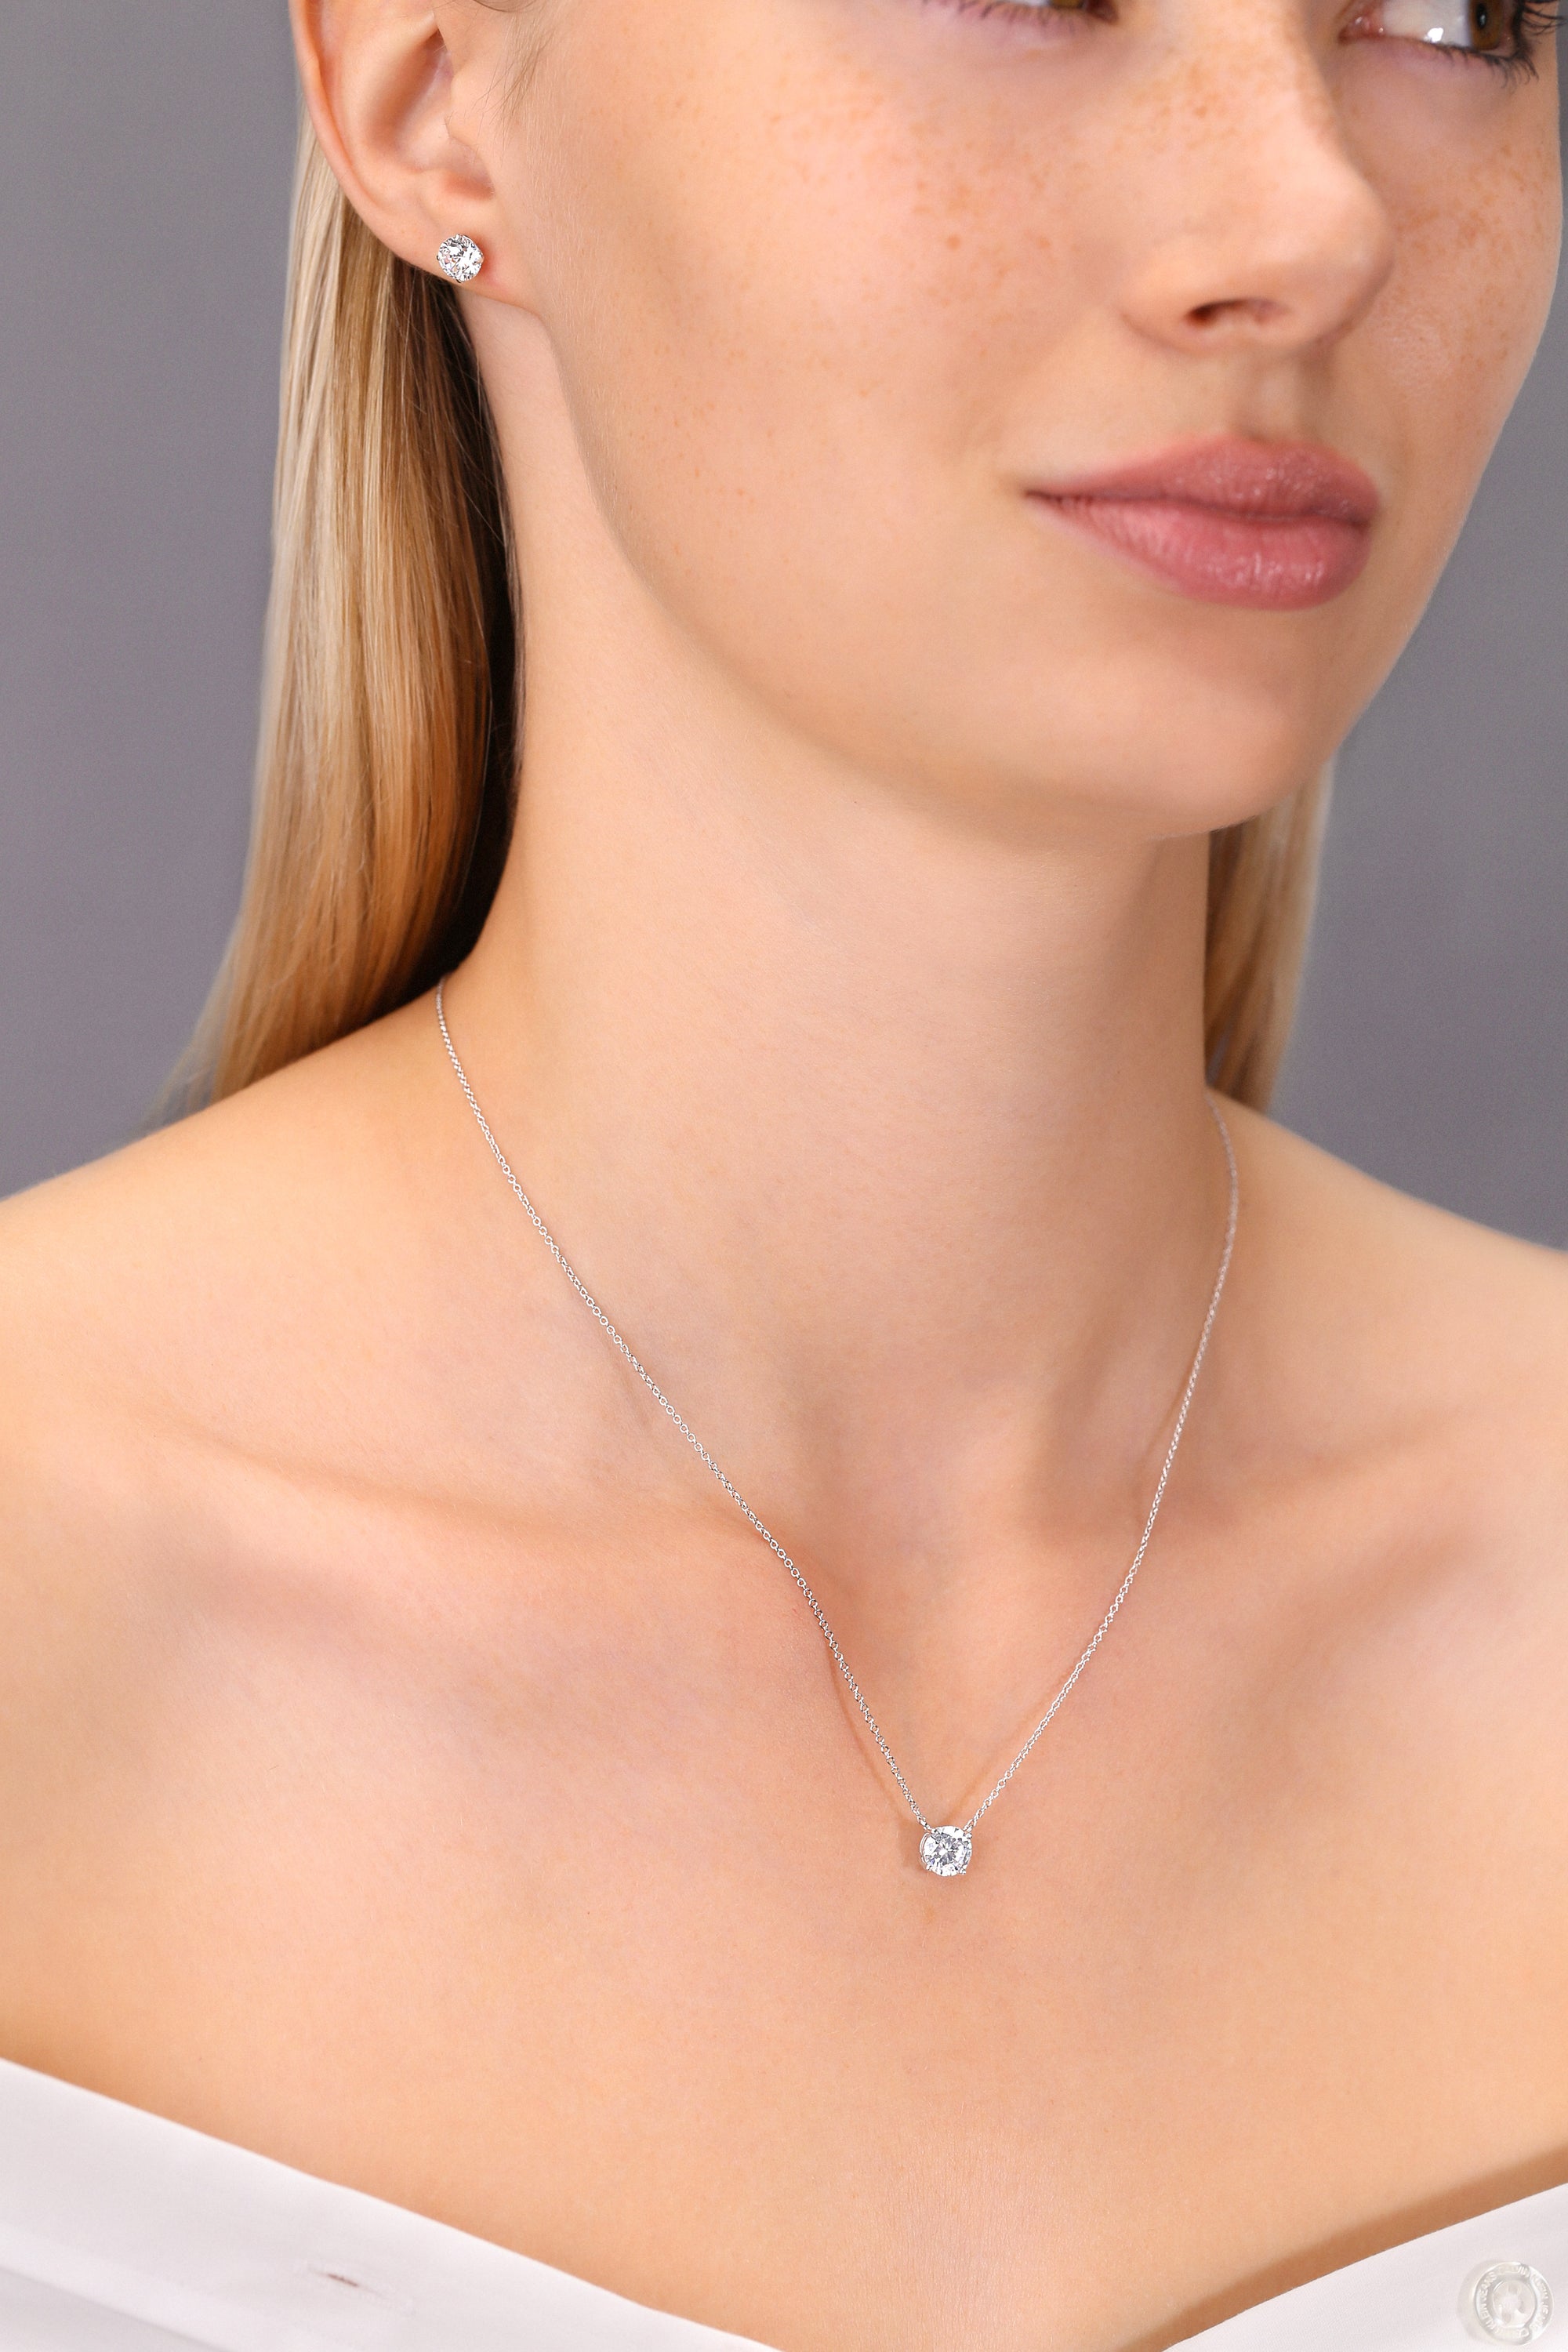 CZ Round Solitaire Necklace in Sterling Silver